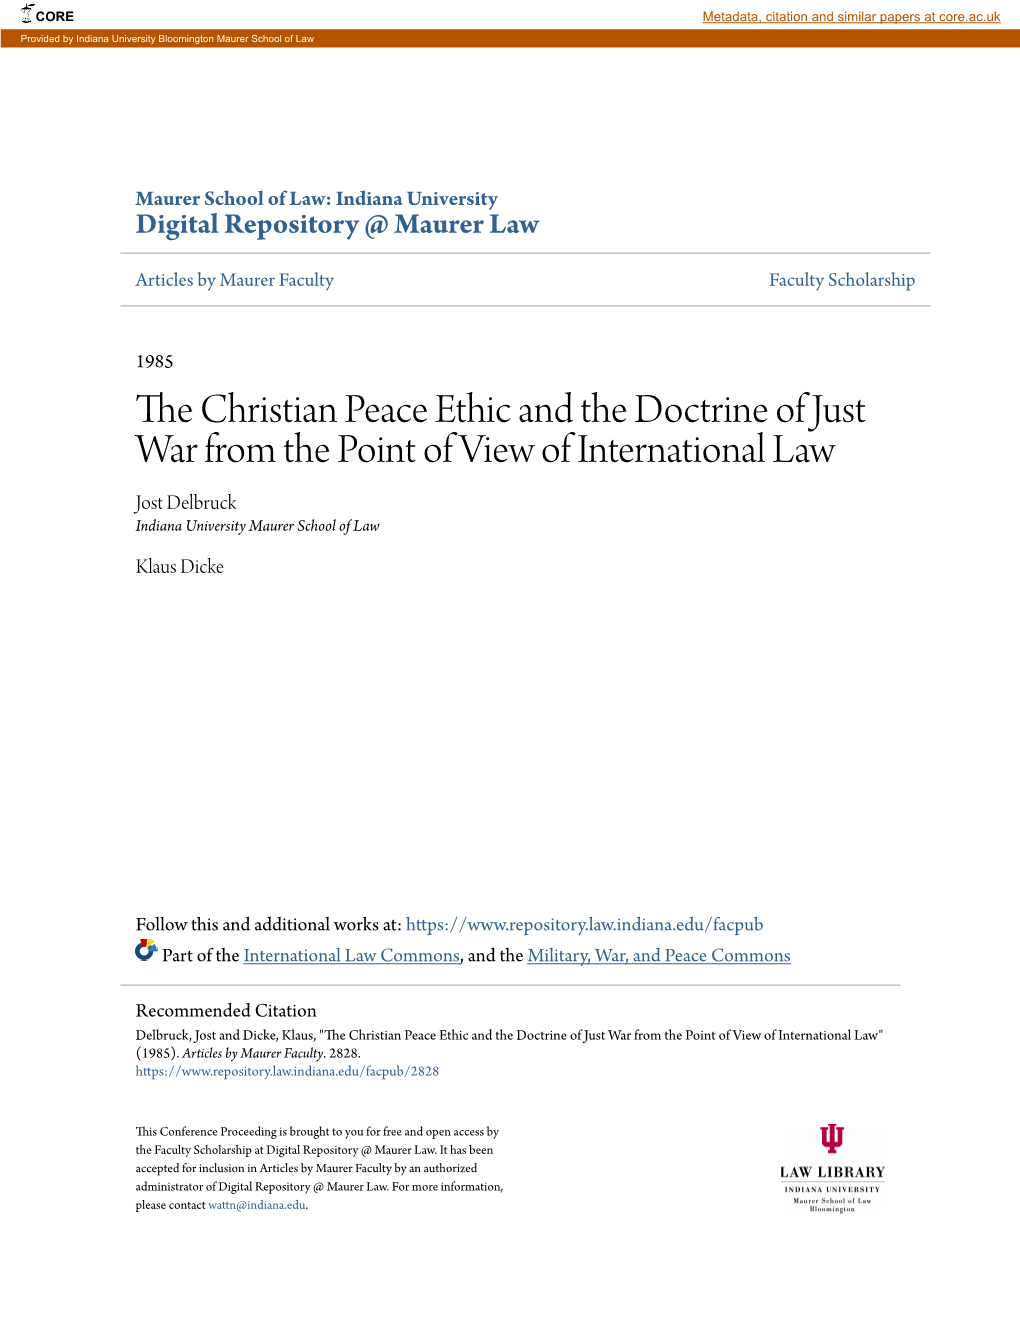 The Christian Peace Ethic and the Doctrine of Just War from the Point of View of International Law